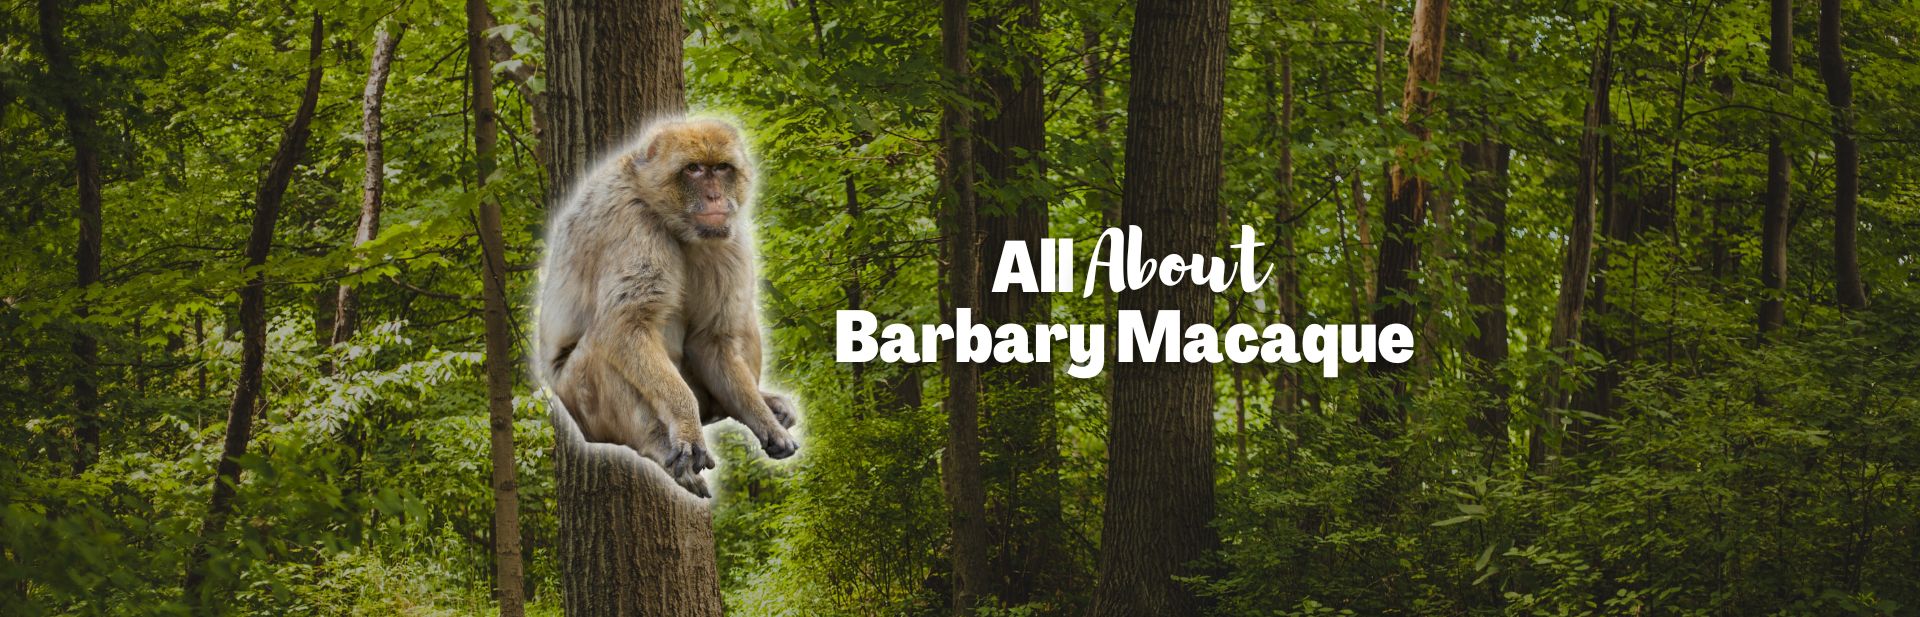 Meet the Barbary Macaque: The Only Primate Found Outside of Asia